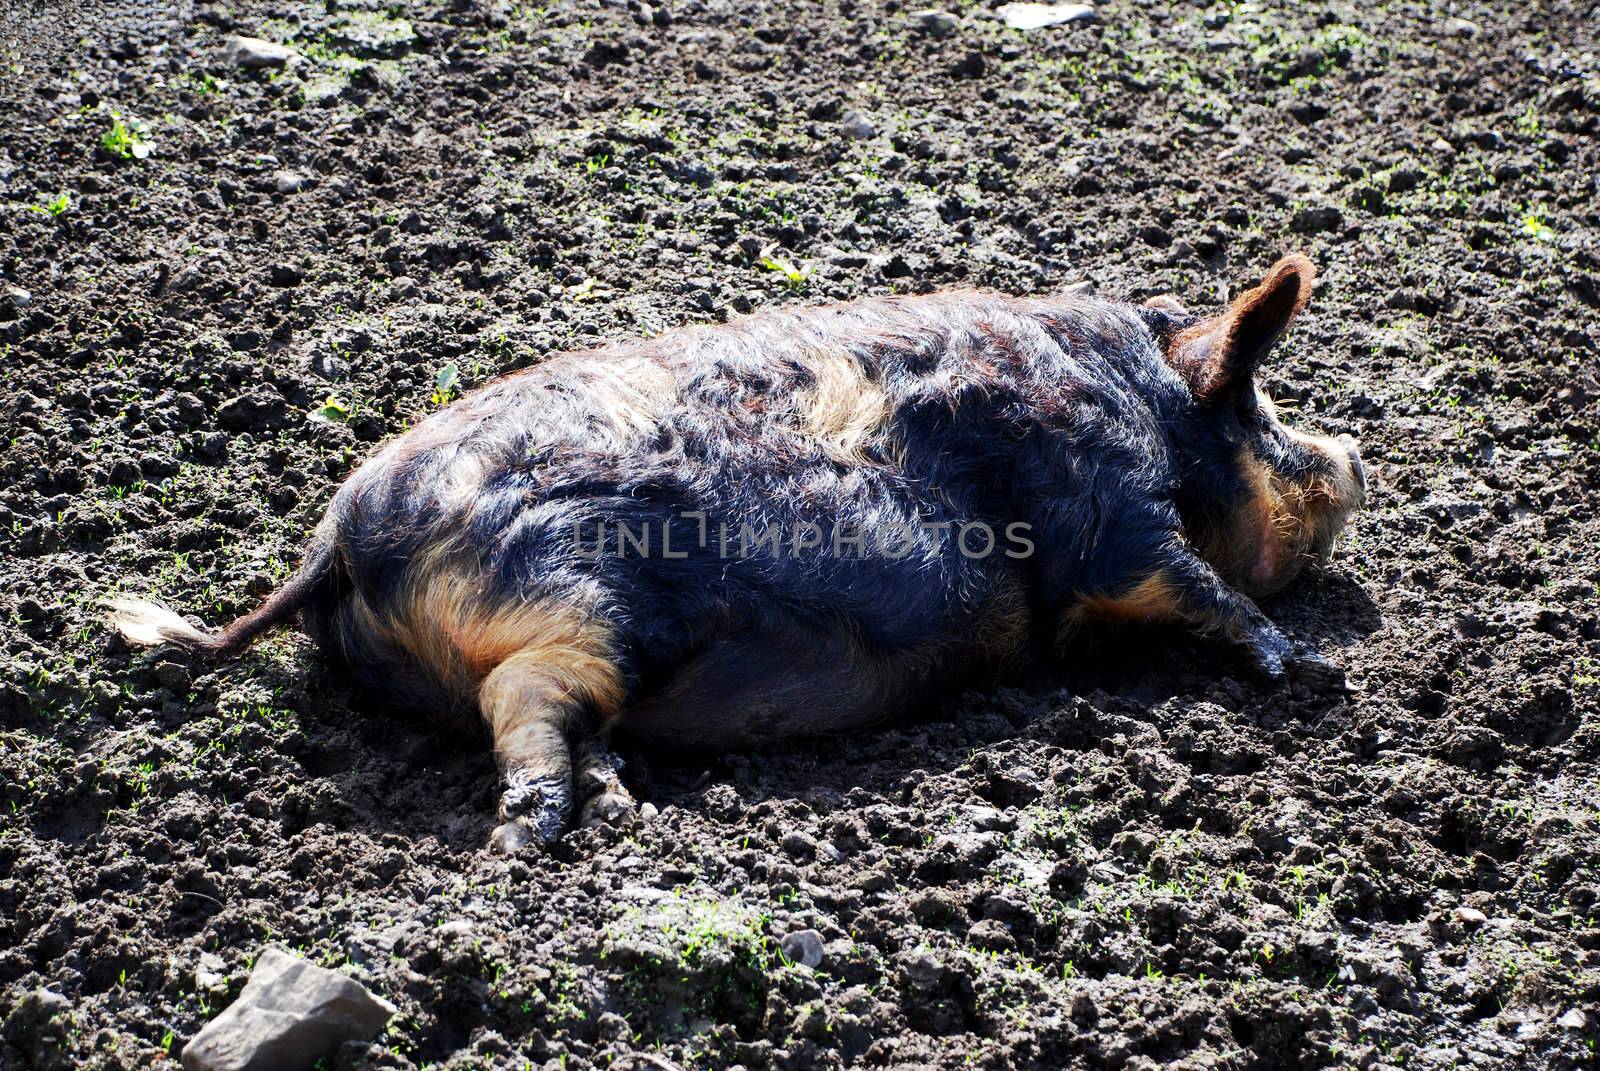 As Happy As a Pig in Muck by pwillitts